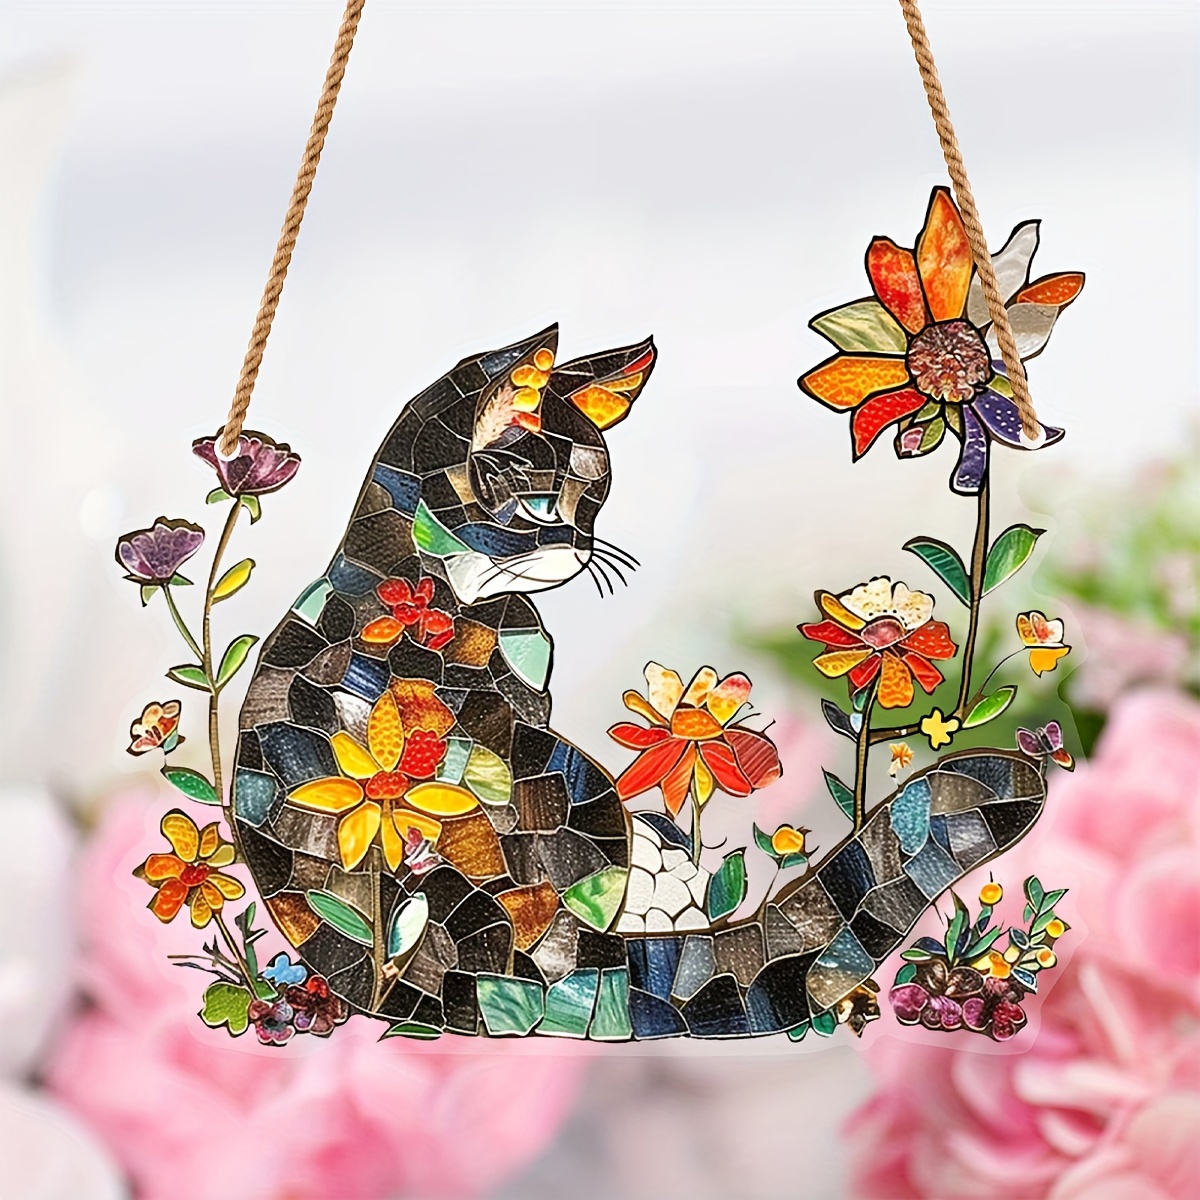 

Acrylic Cat Suncatcher With Flowers - Hanging Stained Window Decoration For Indoor And Outdoor Use, No Electricity Required - Ideal Gift For Cat Lovers